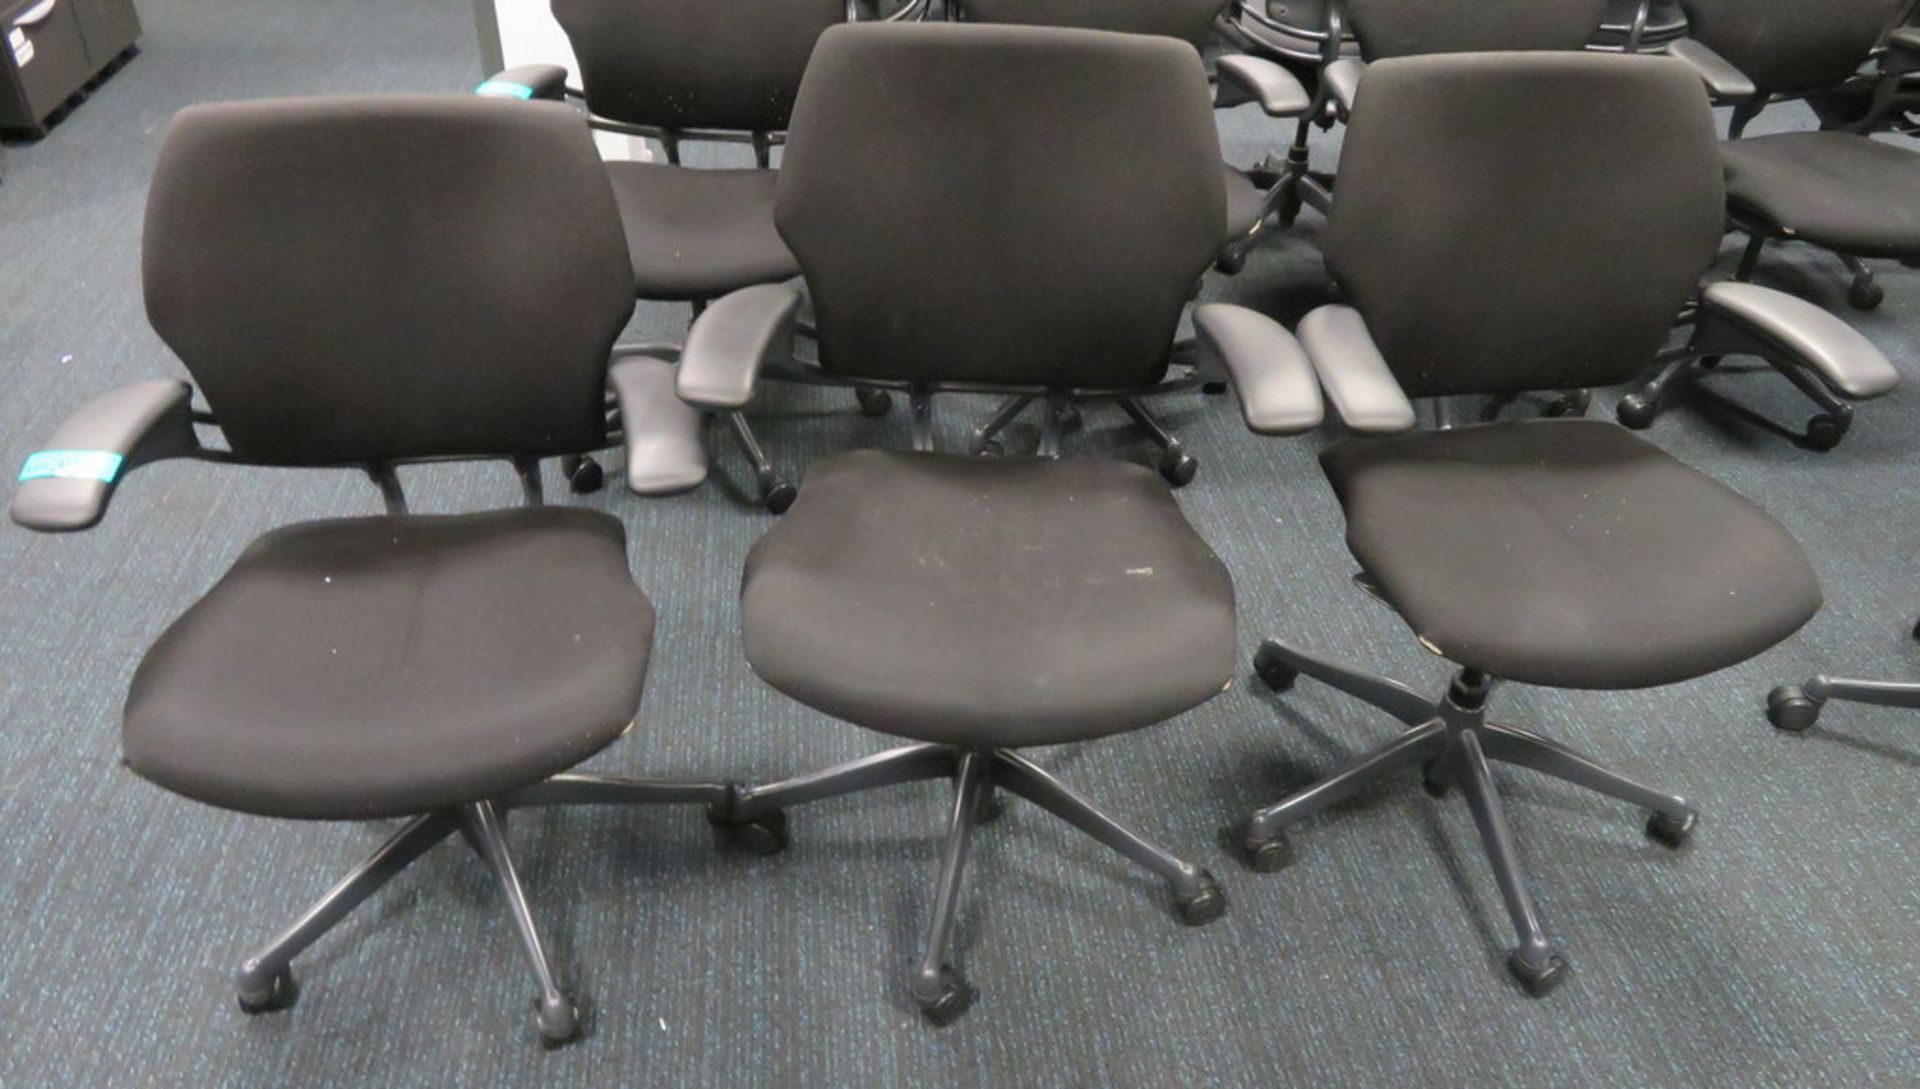 3x Humanscale Freedom Task Office Swivel Chairs. Varying Condition.